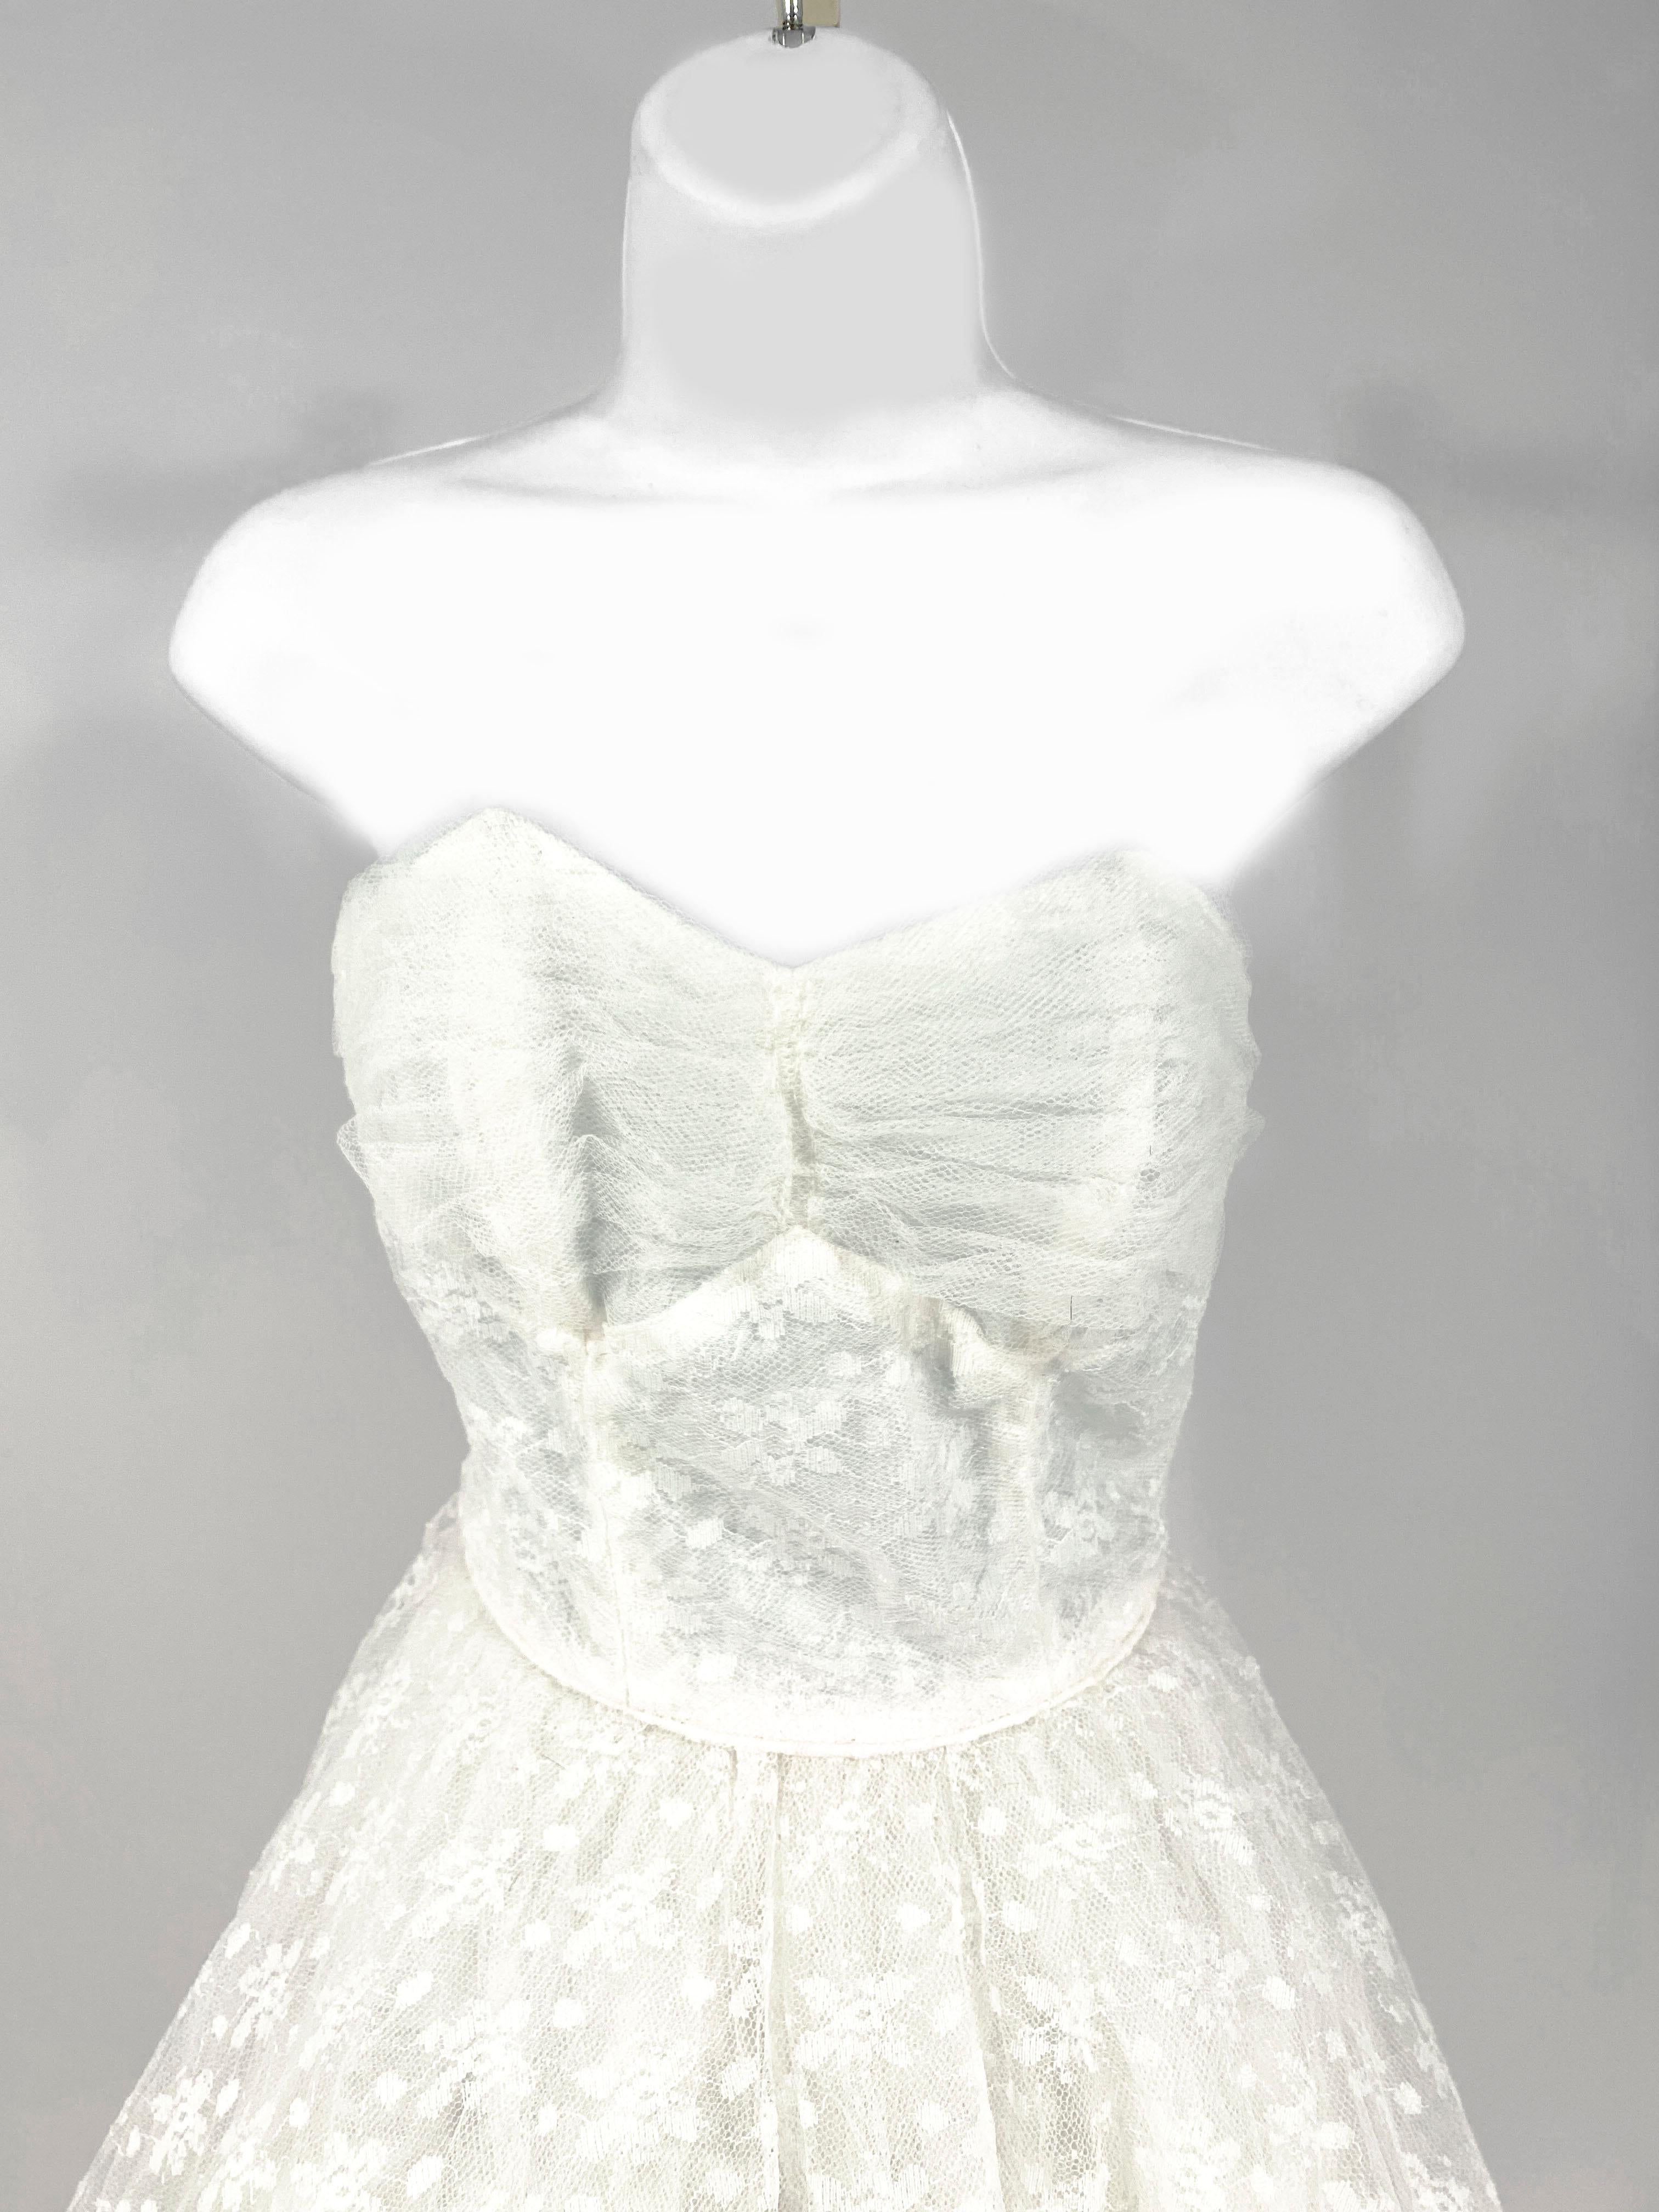 1950s Petit Emma Domb white dress that can be a Prom or a wedding dress. The skirt and bolide is covered in a white polyester lace with a floral pattern. The strapless top is accented with ruched tulle and the back of the skirt has a scalloped drape